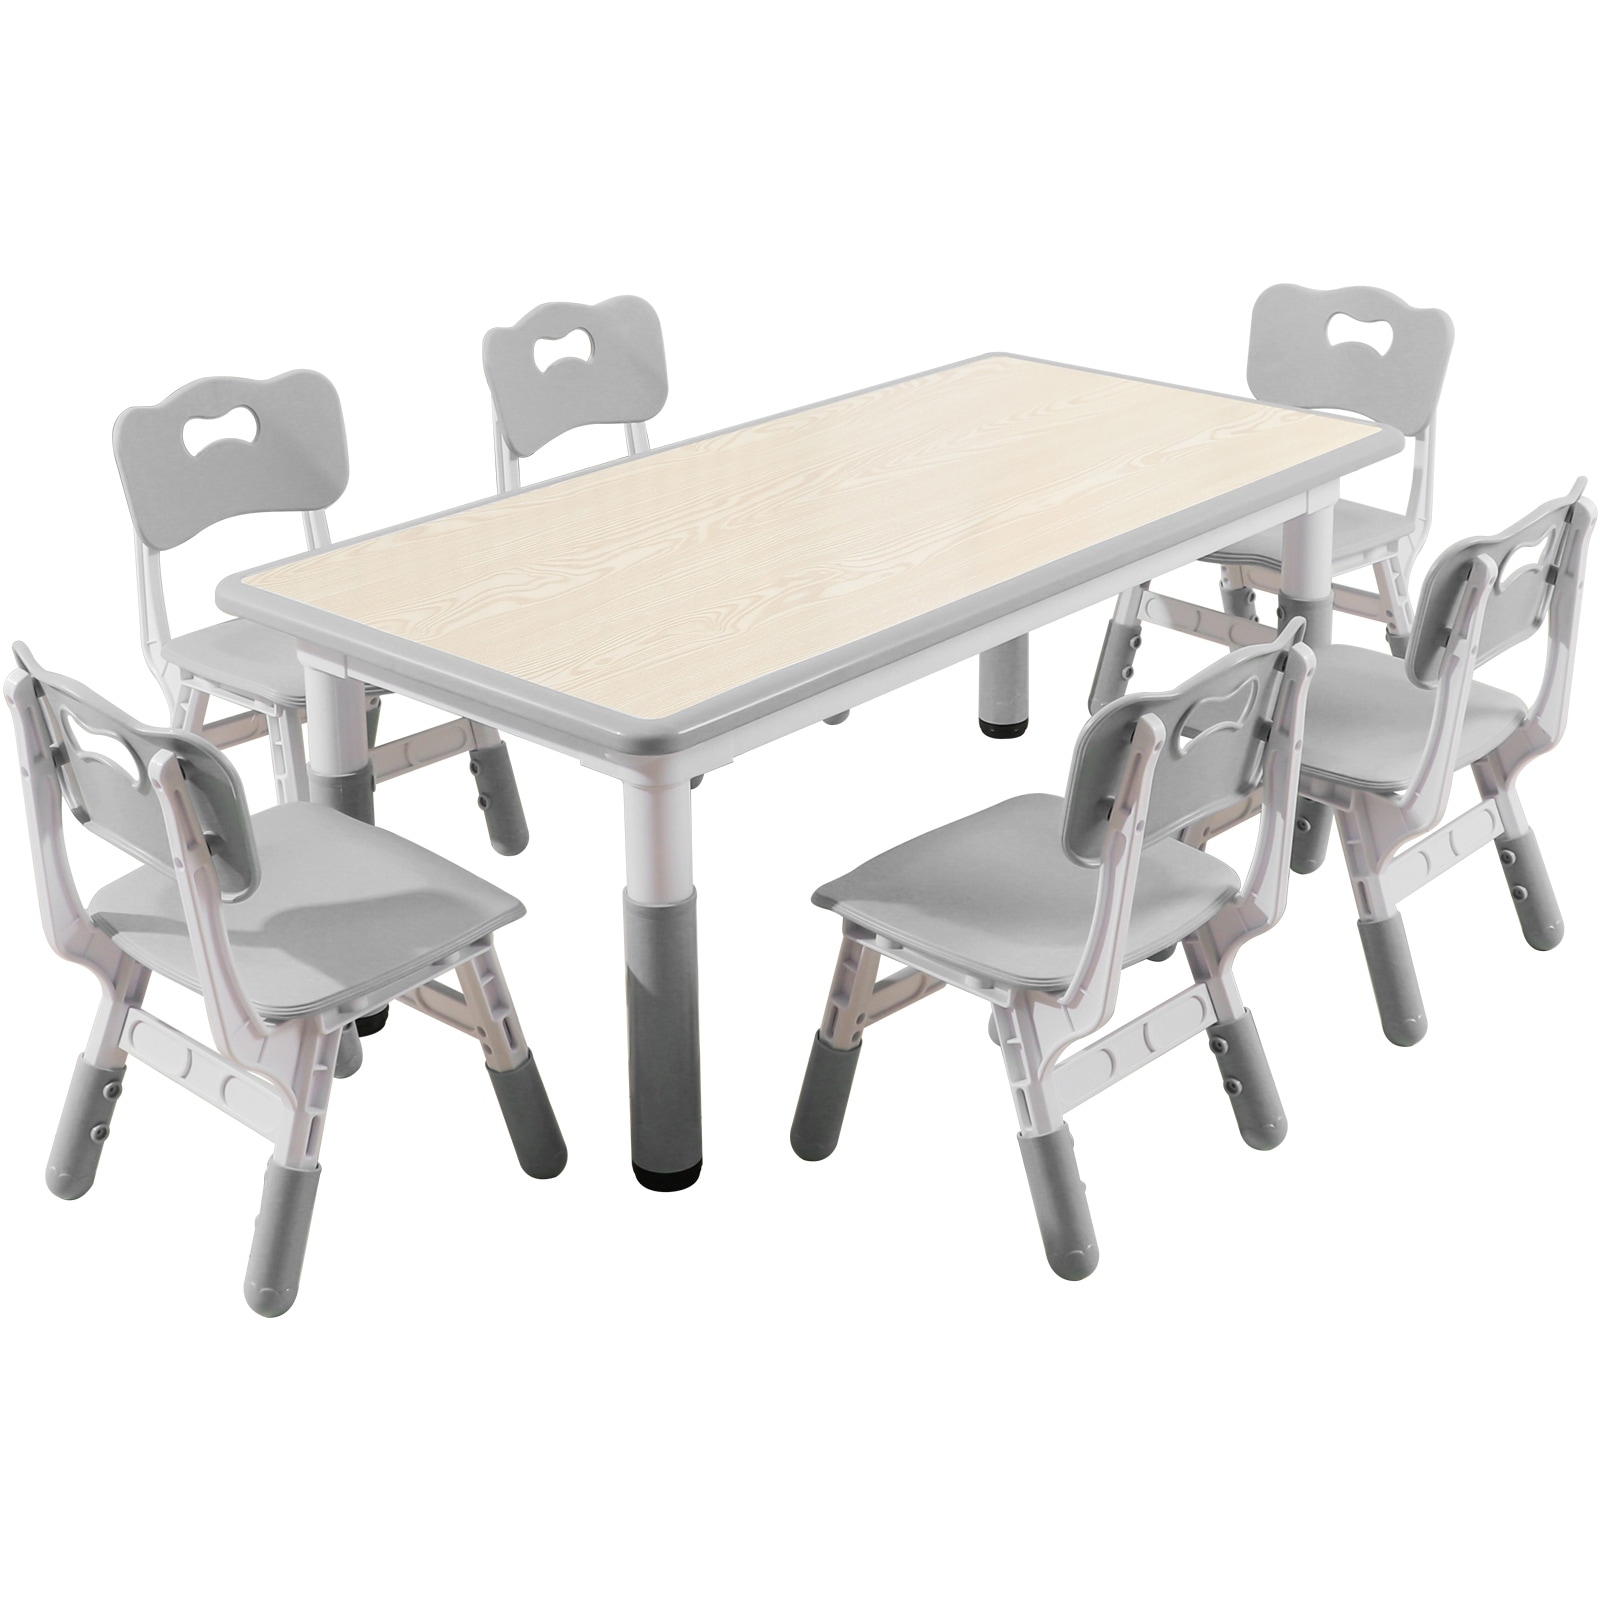 YUKOOL Kids Table and Chair Set - Multi-Functional, Adjustable Height, Ergonomic Design, HDPE Material